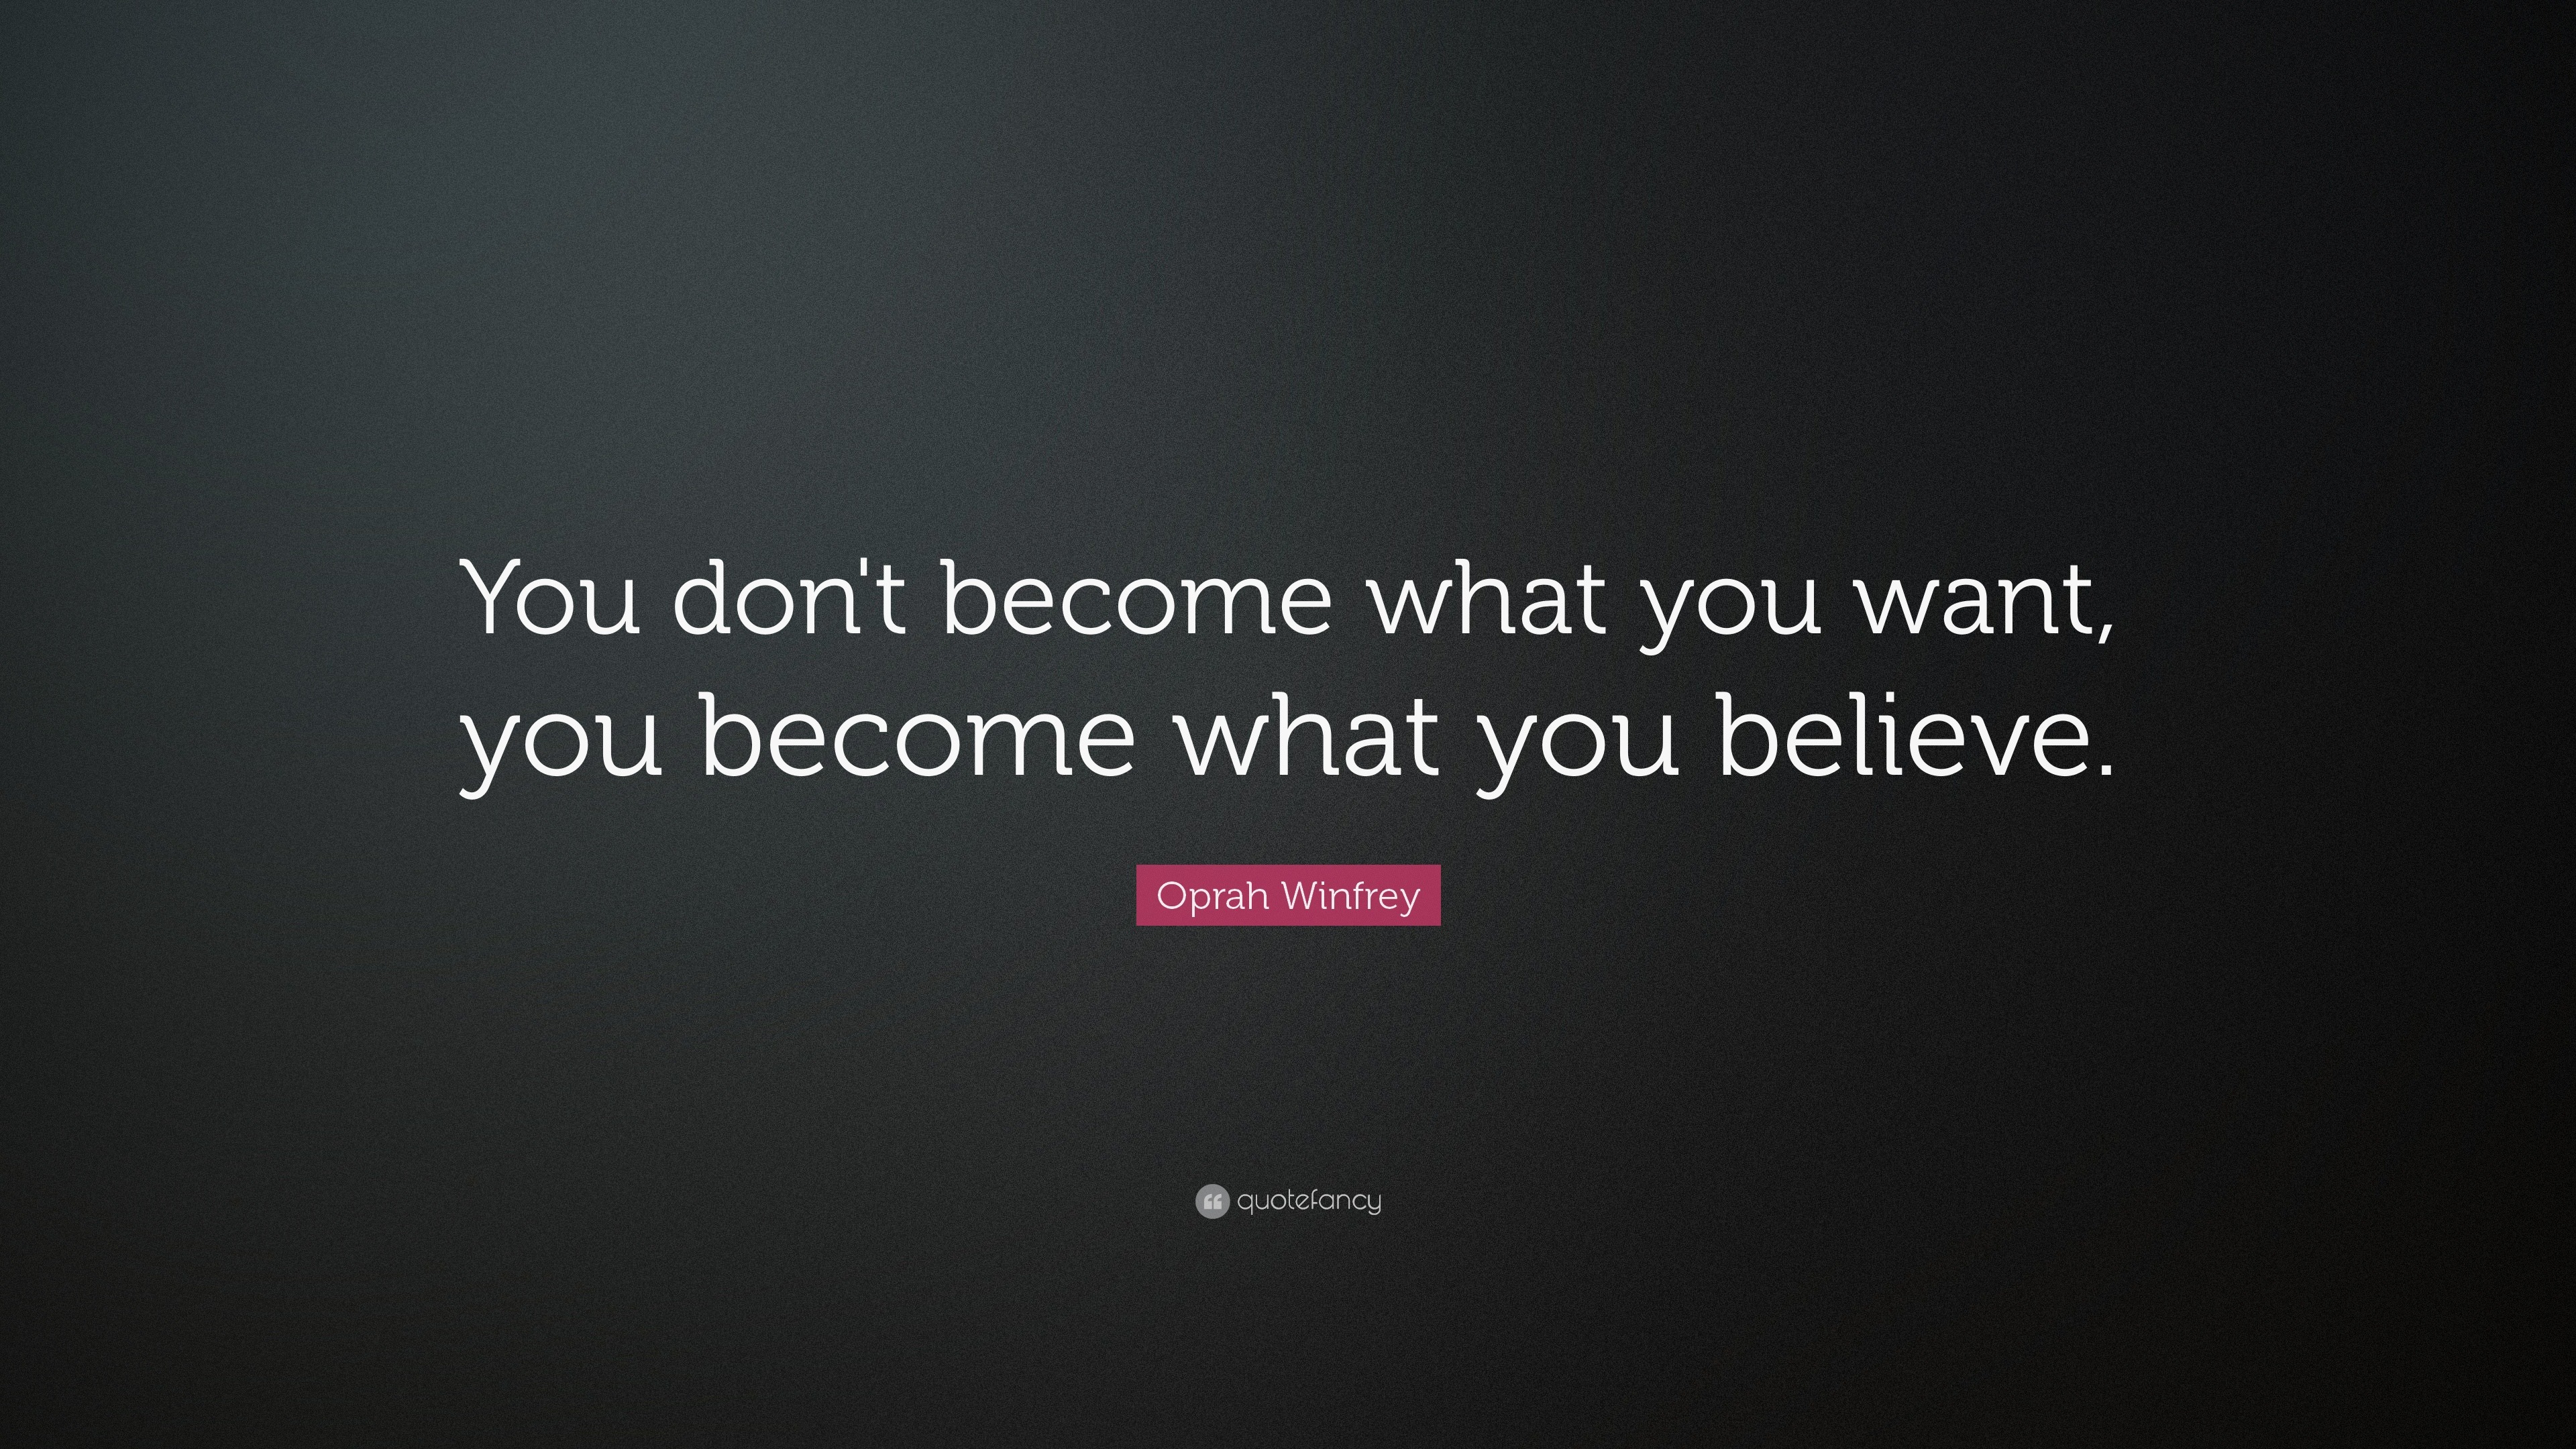 Oprah Winfrey Quote: “You don't become what you want, you become what you  believe.”